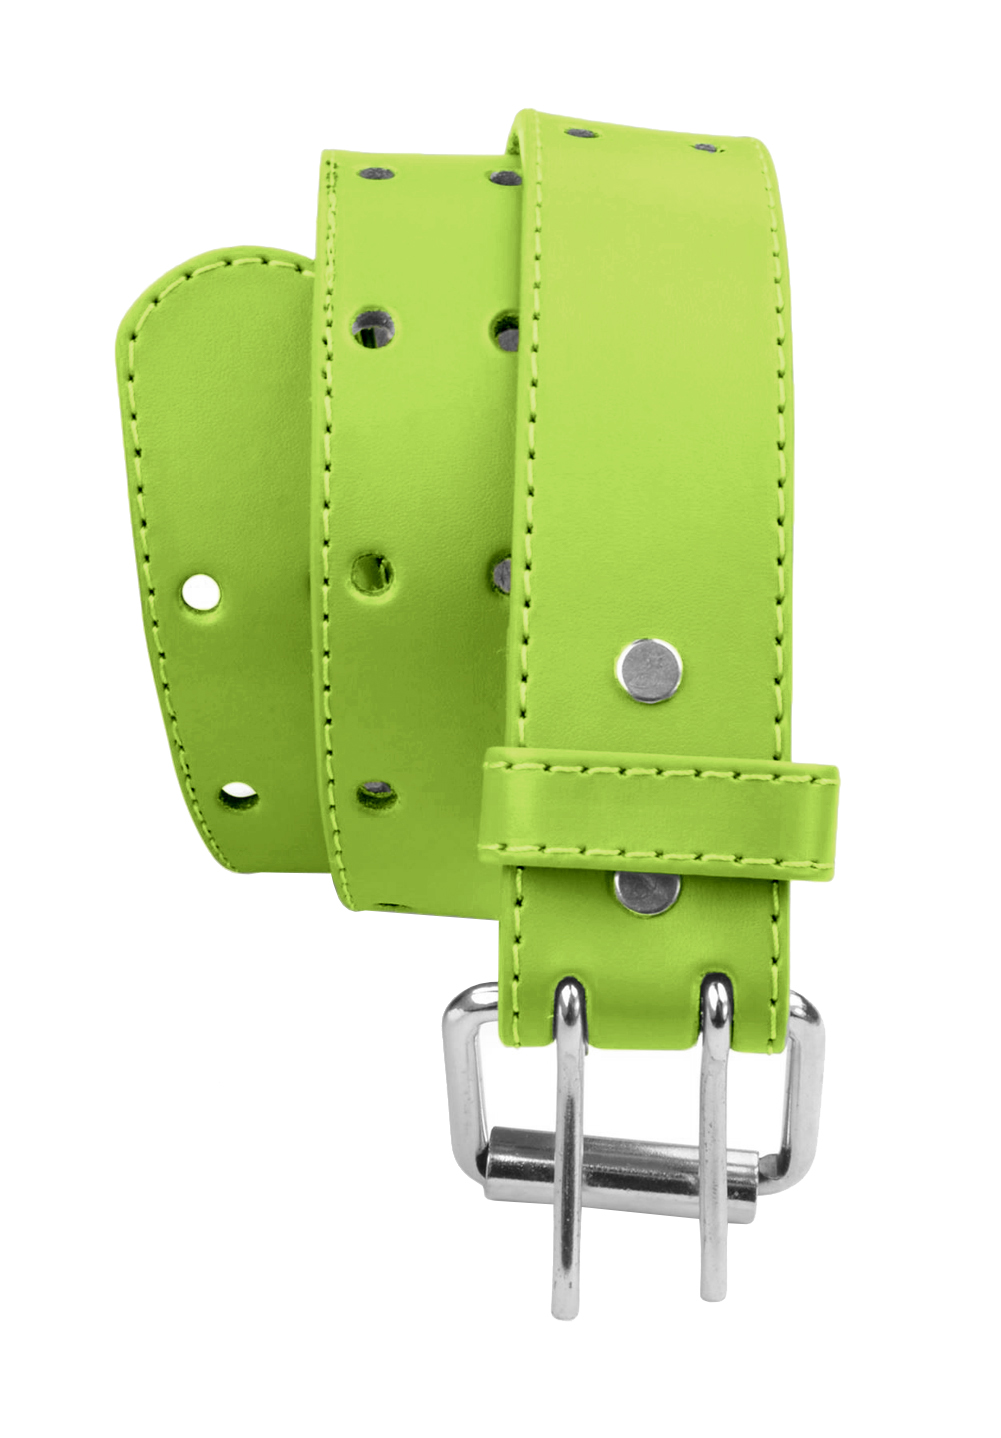 Belle Donne - Girl's Leather Two Hole Perforated Jean Belt - Light Green/Medium